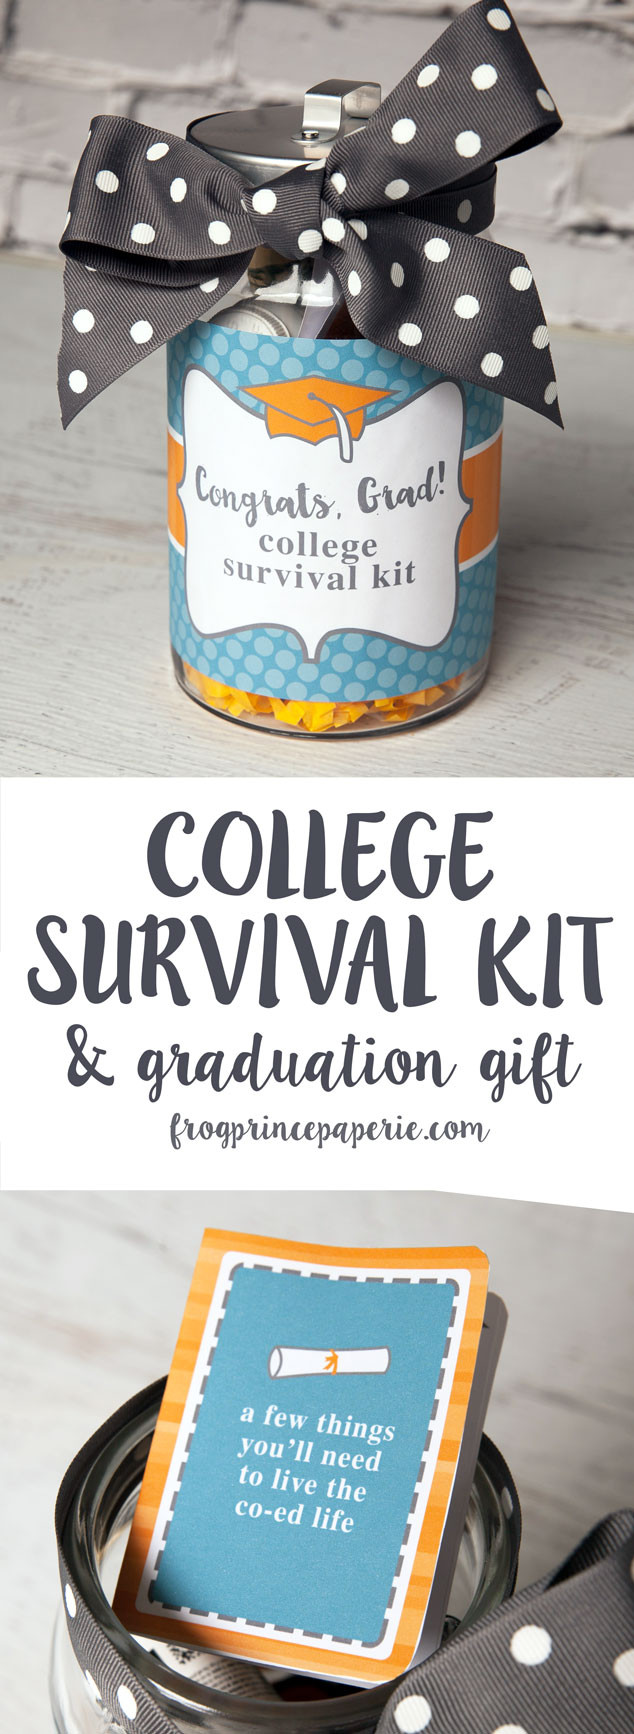 DIY High School Graduation Gifts
 College Survival Kit DIY Graduation Gift Frog Prince Paperie